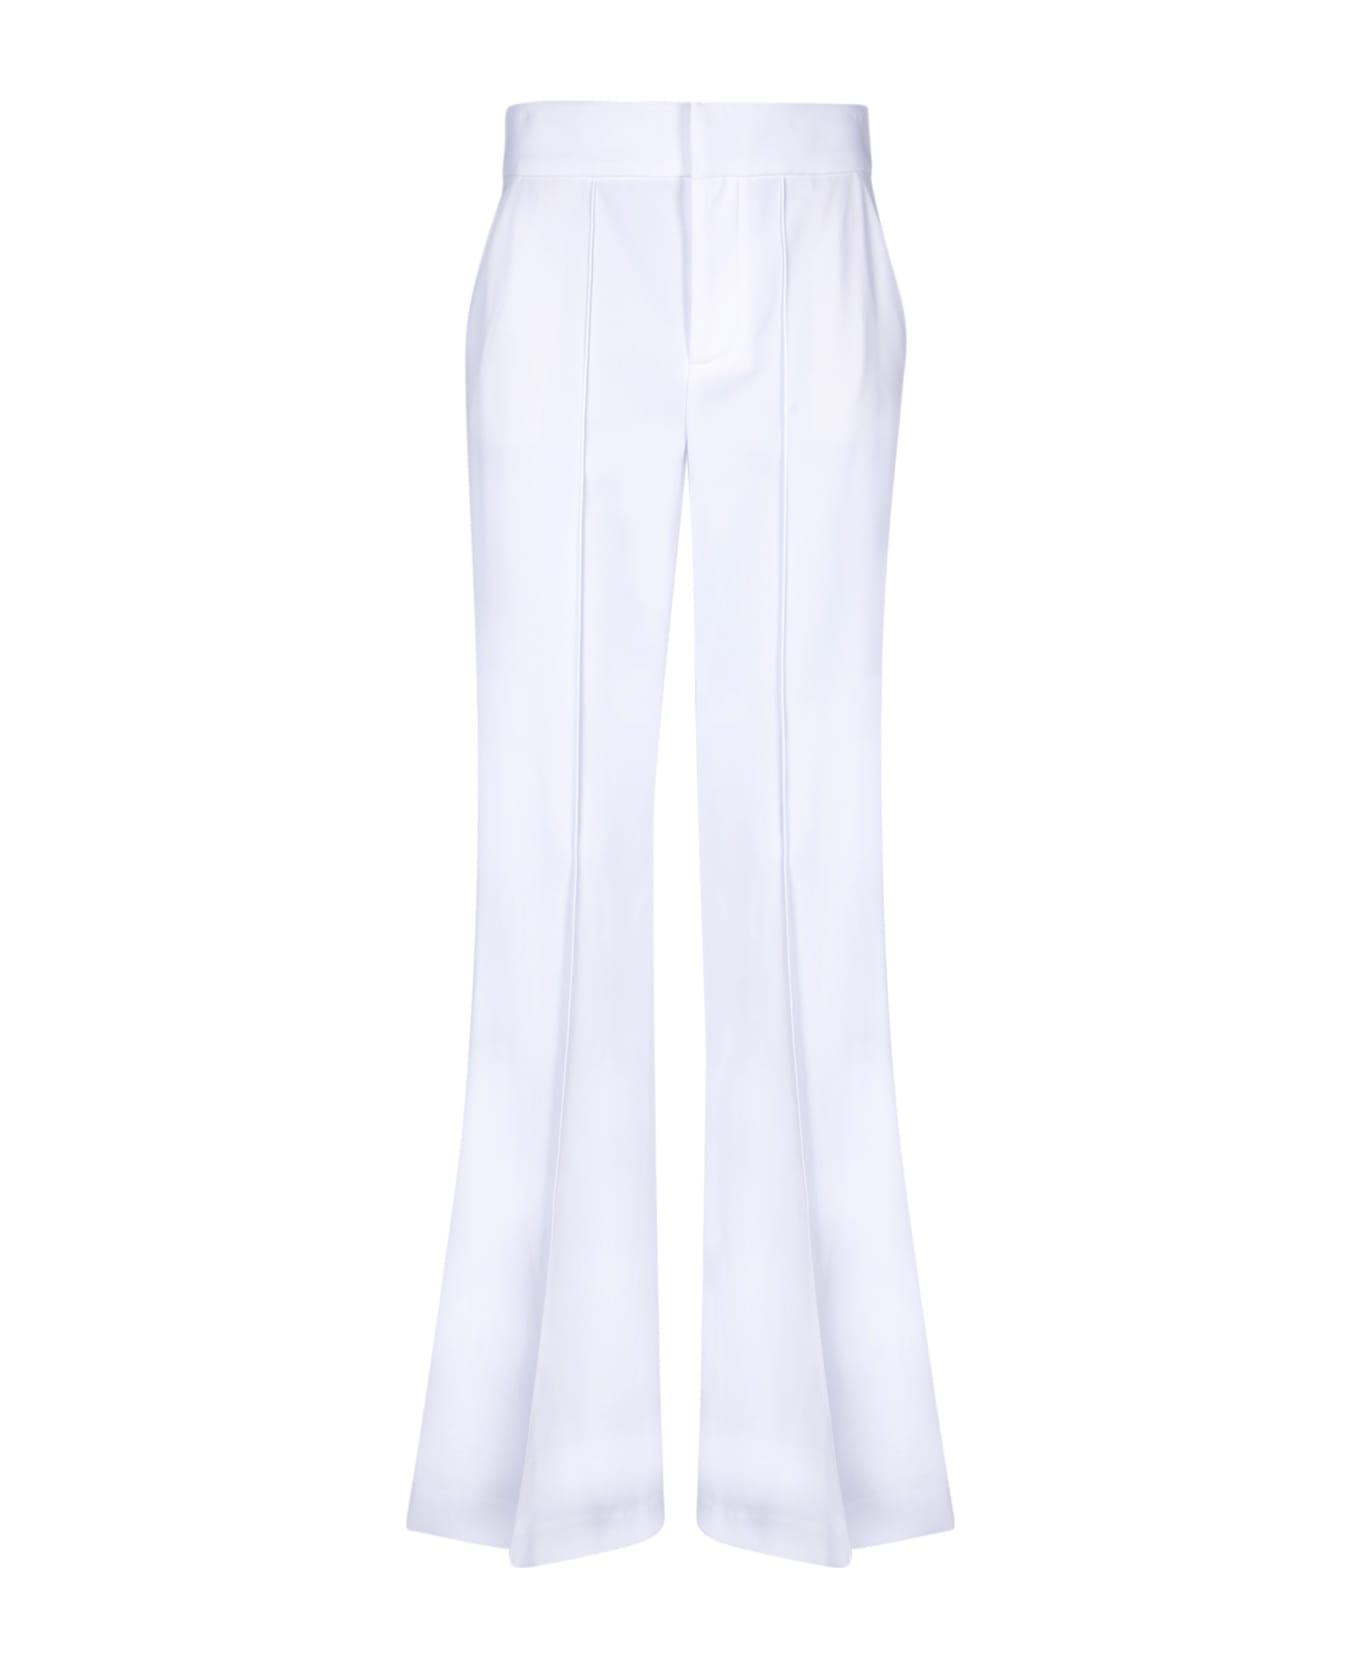 Alice + Olivia White Dylan Crepe Trousers - White ボトムス